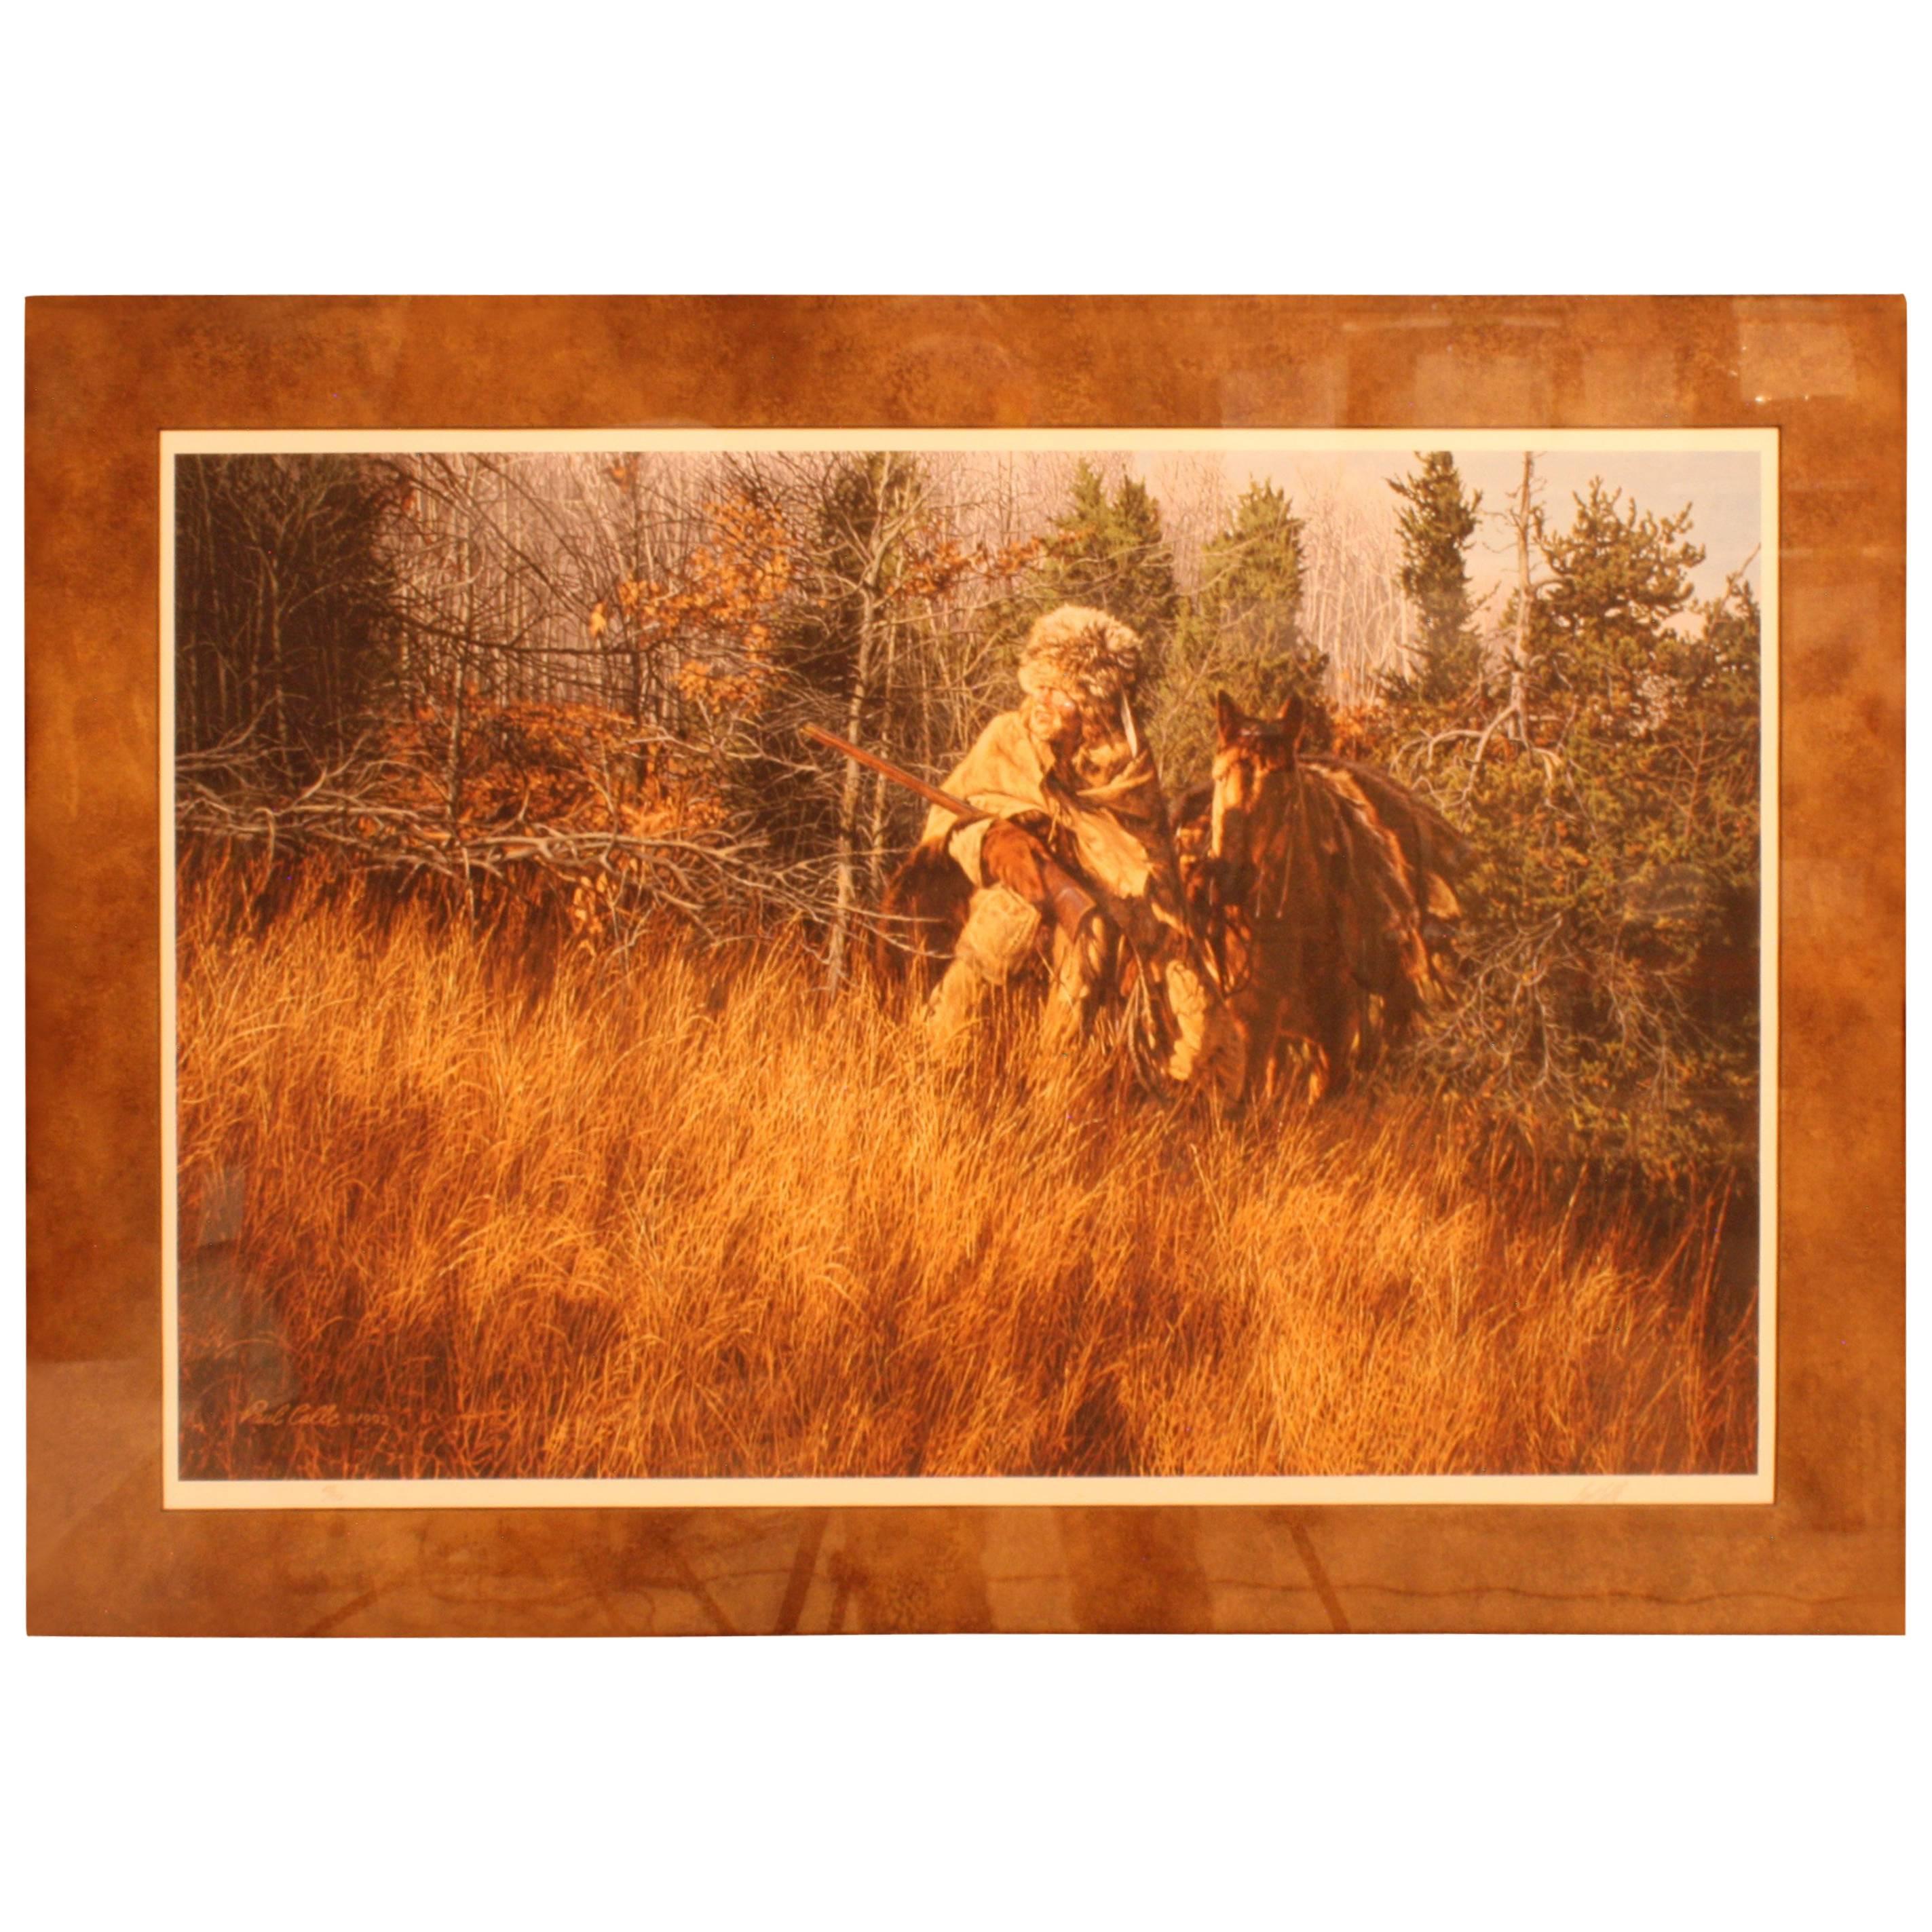 Paul Calle "Through the Tall Grass" Signed LE Artist Print # 68/950 For Sale